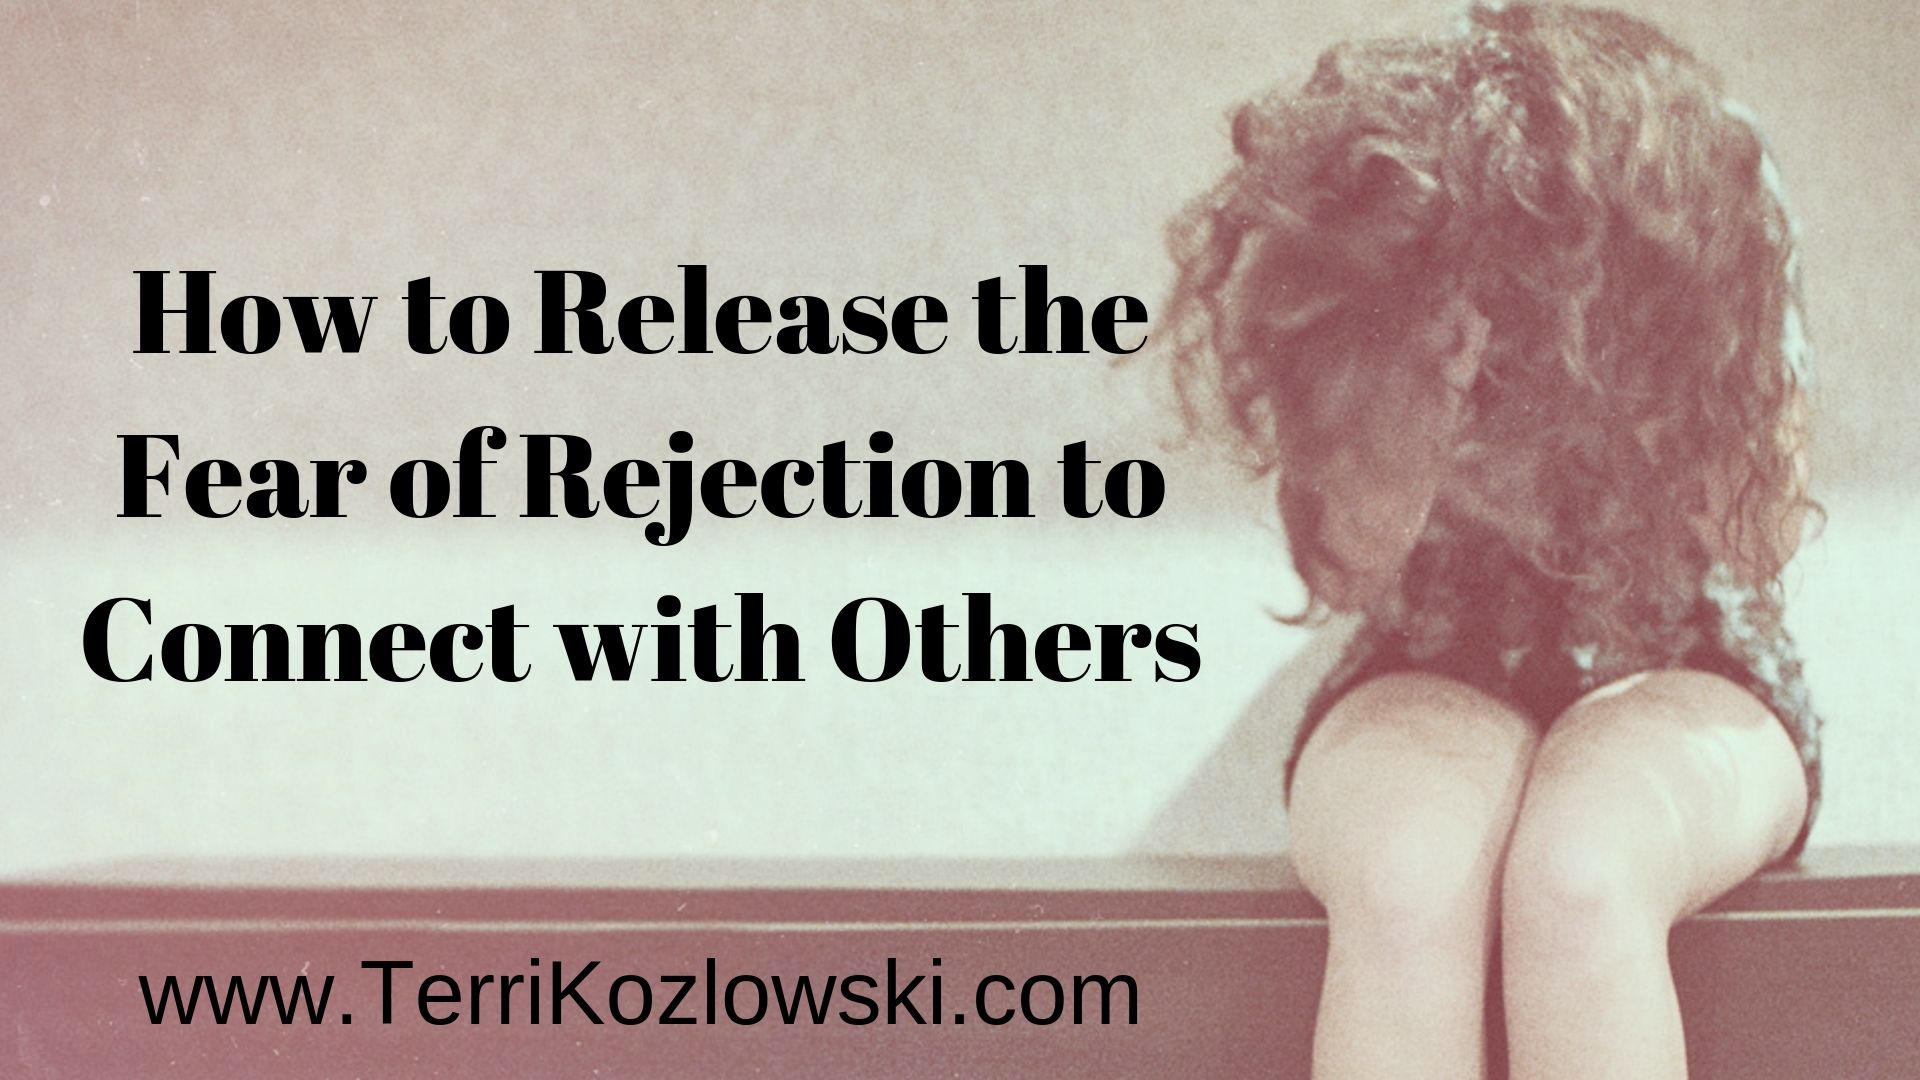 How to Release the Fear of Rejection to Connect with Others